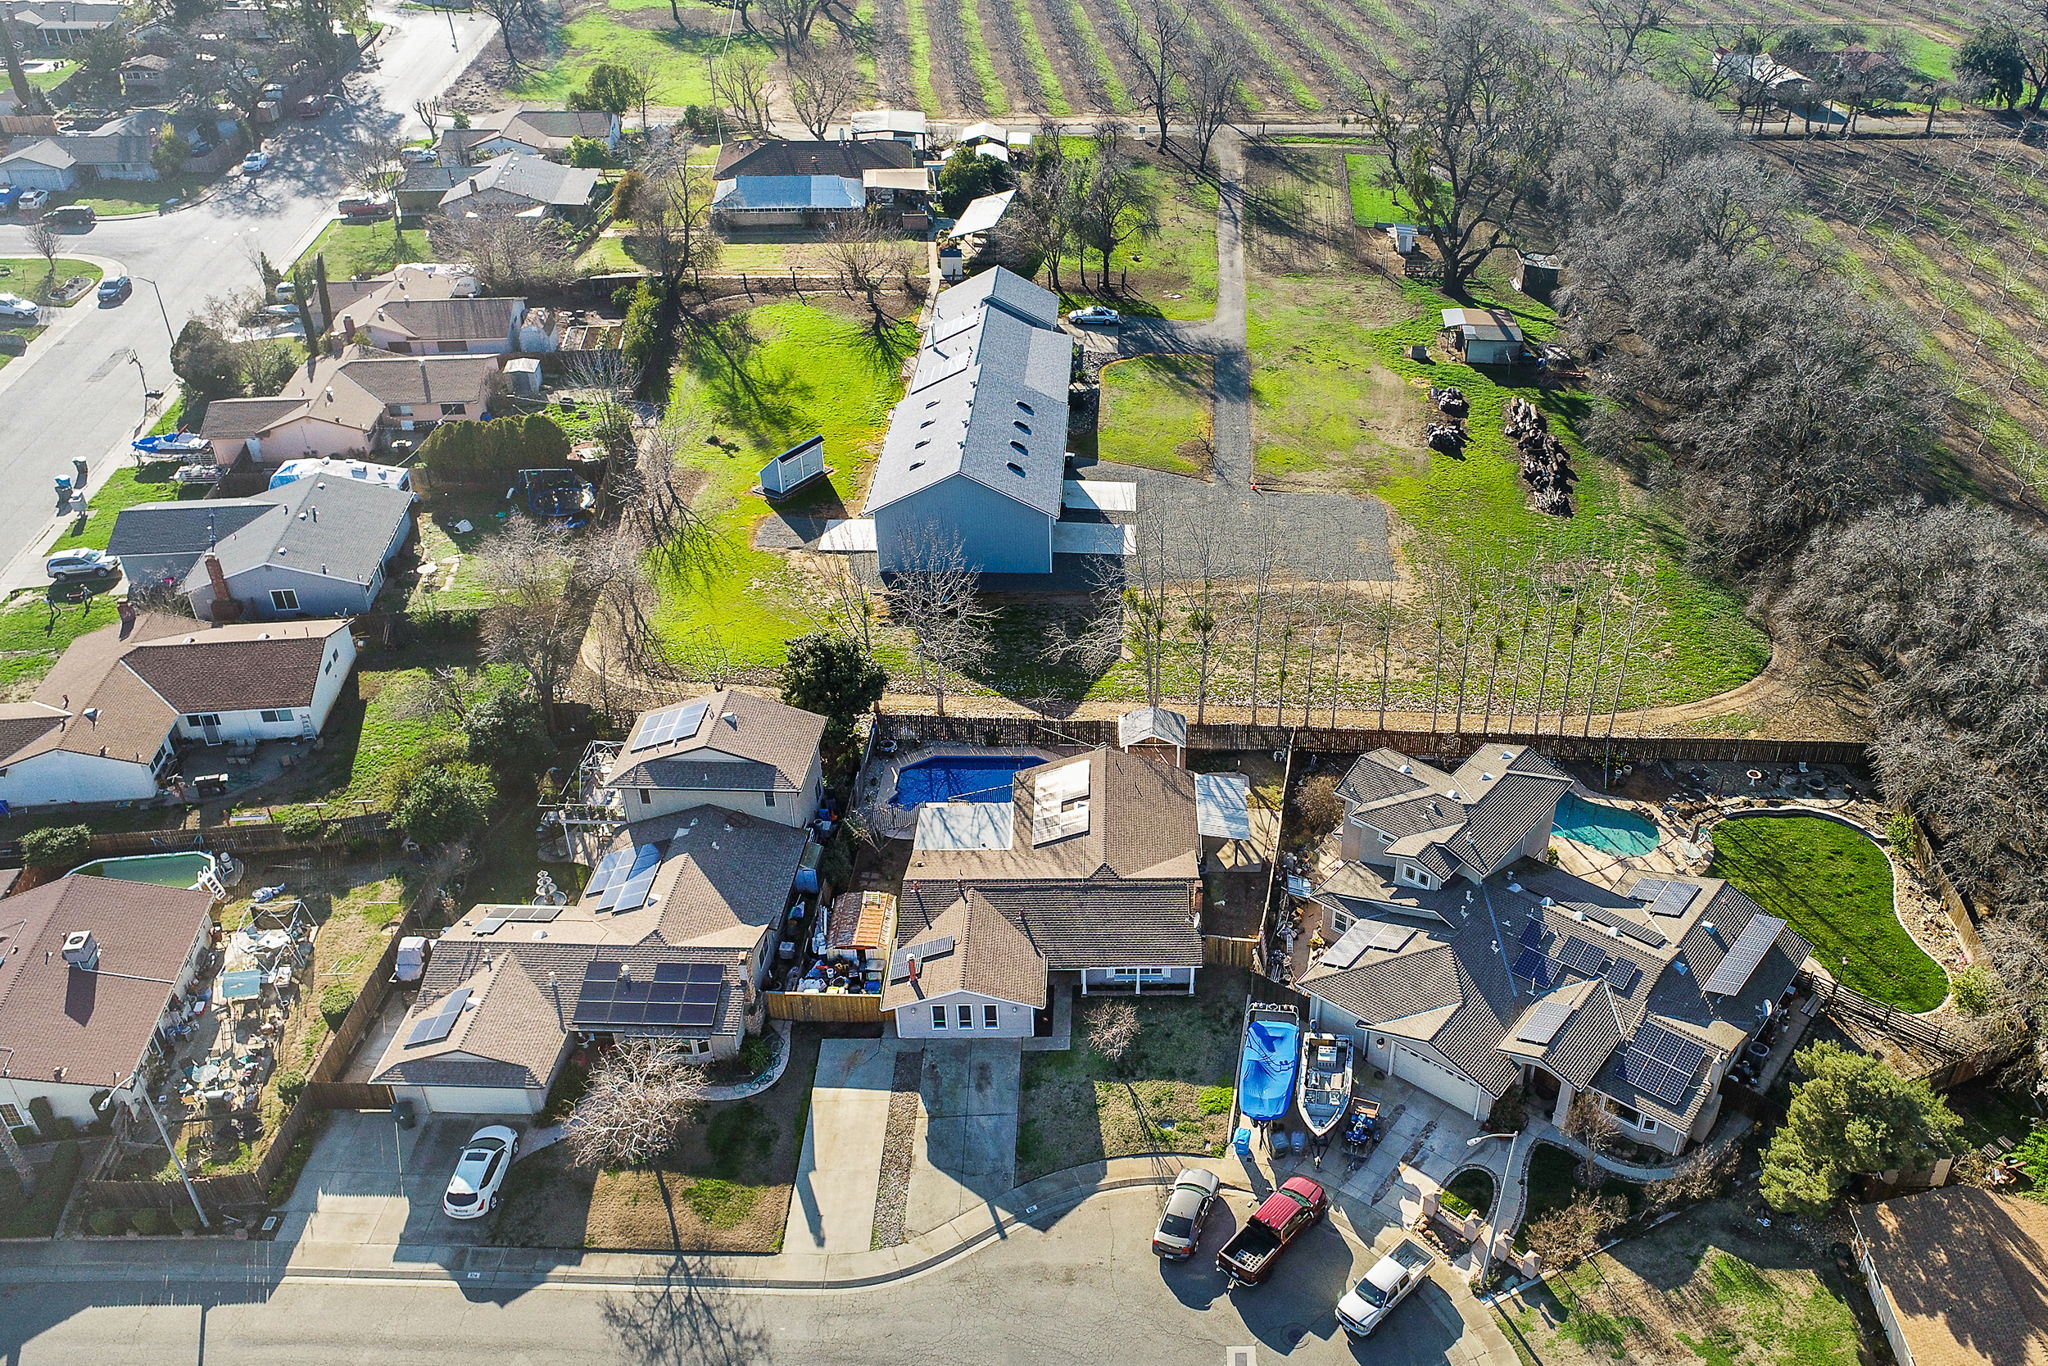 Overhead View of the Property